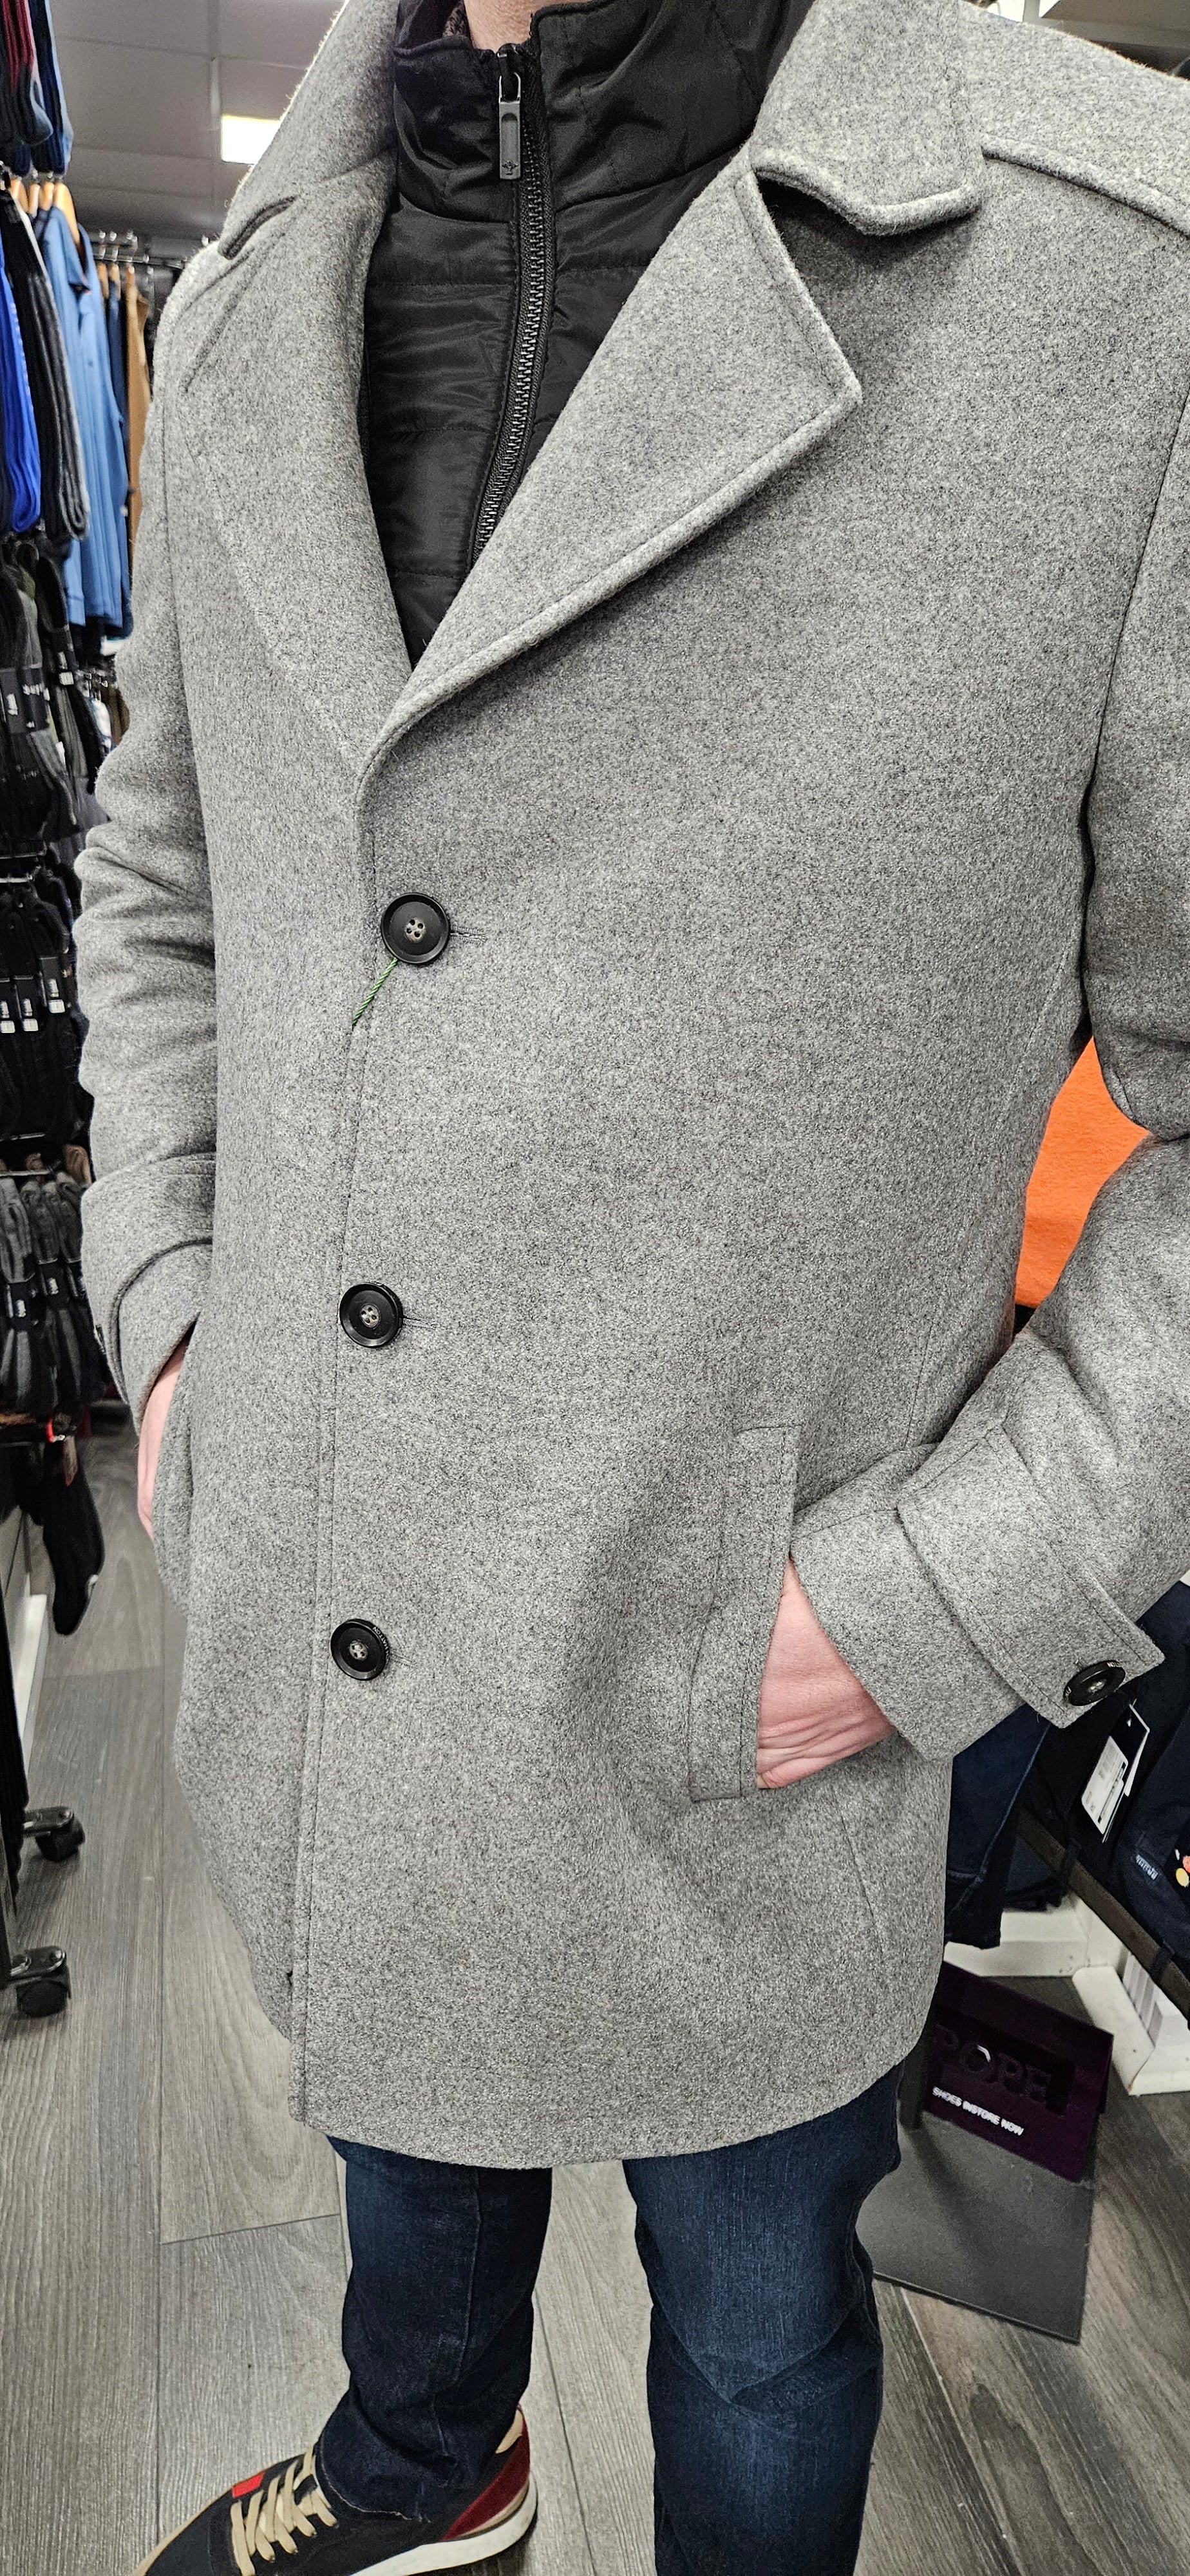 FYNCH HATTON WOOL COAT WITH REMOVABLE INLAY-GREY